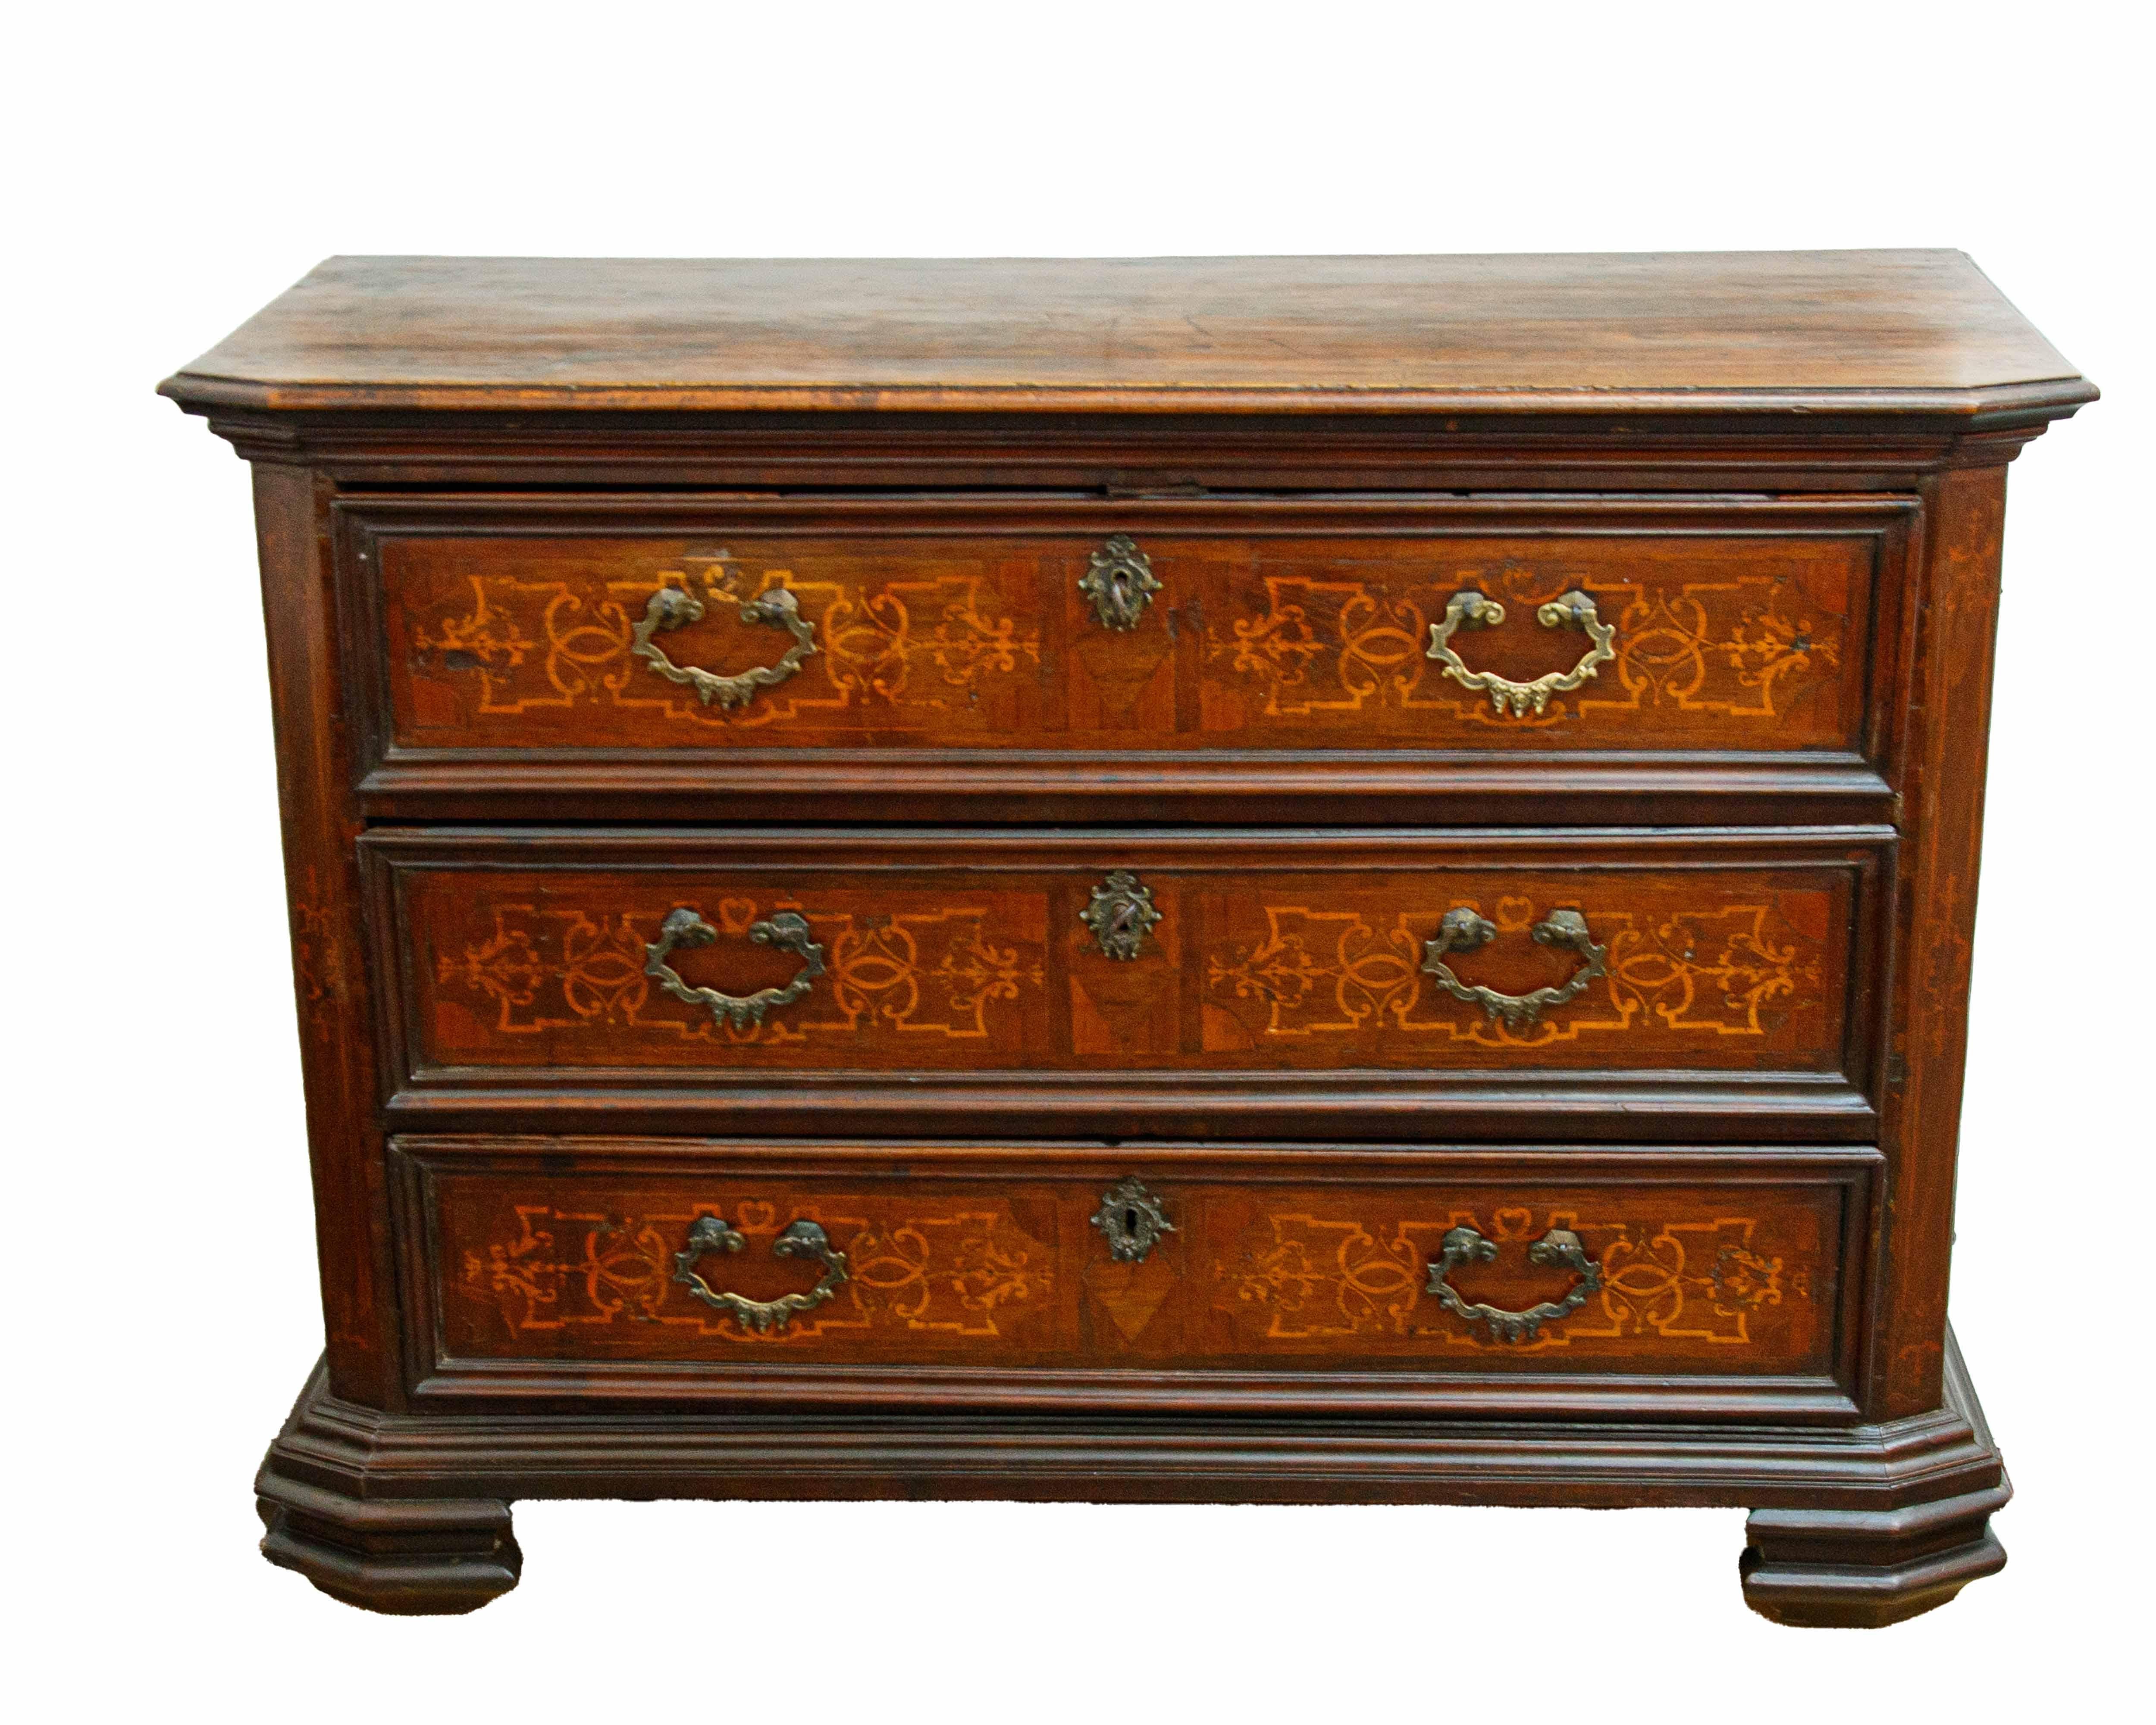 Lake Maggiore, 17th century

Three-drawer dresser

Inlaid wood, 89 x 120 x 50

Three-drawer chest of drawers referable to 17th-century Lake Maggiore manufacture from Varese.

On the major side are plinth ribs, as well as delicate ornamental inlays